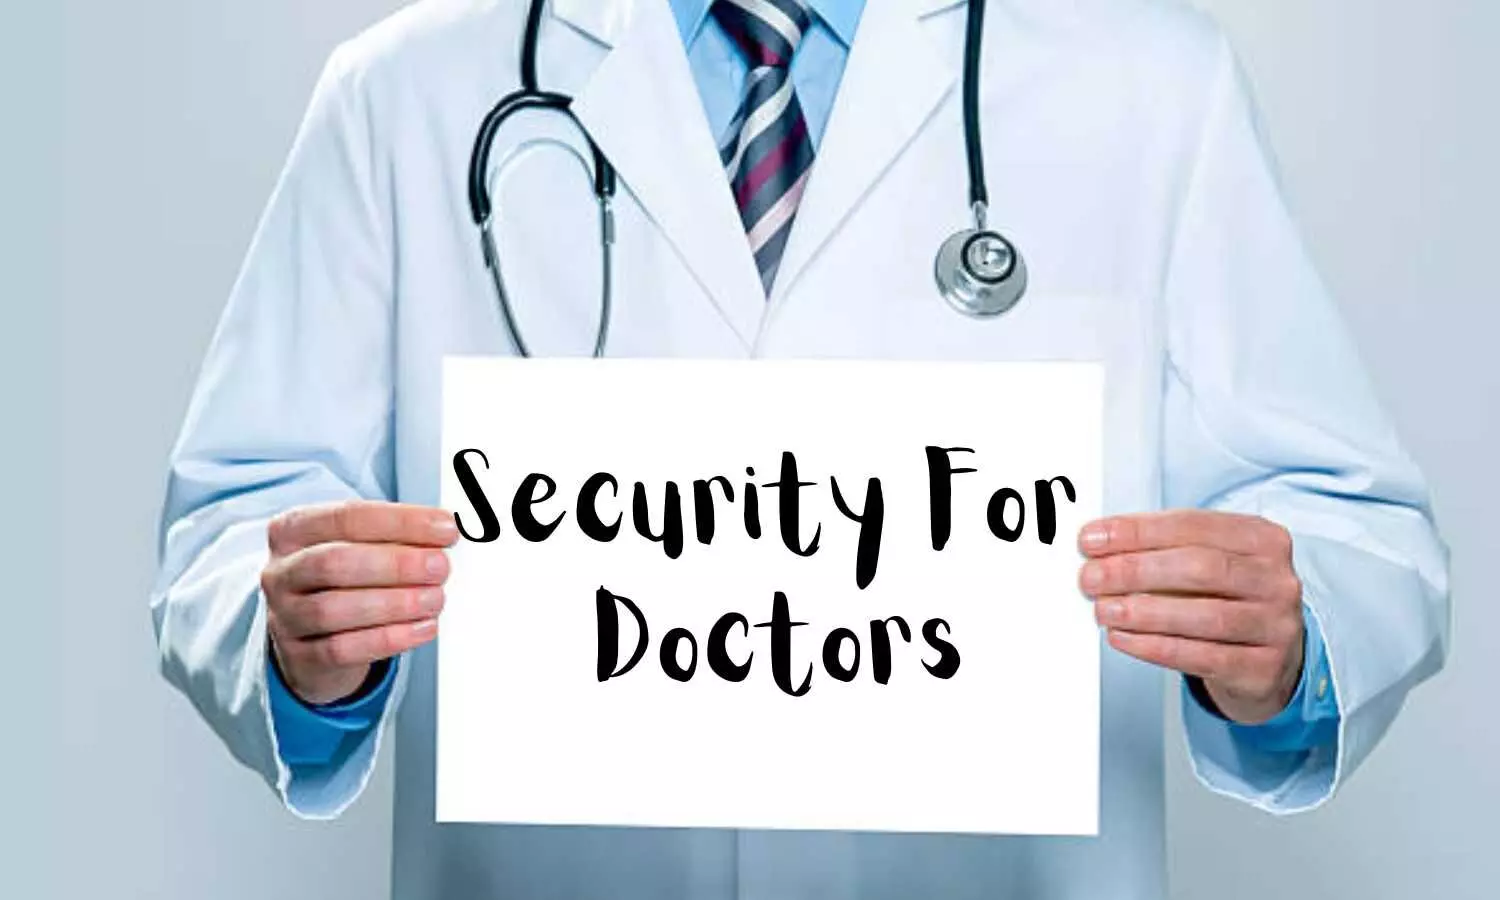 Cant Compromise With Security: Doctors Demand CISF for Security at Hospitals